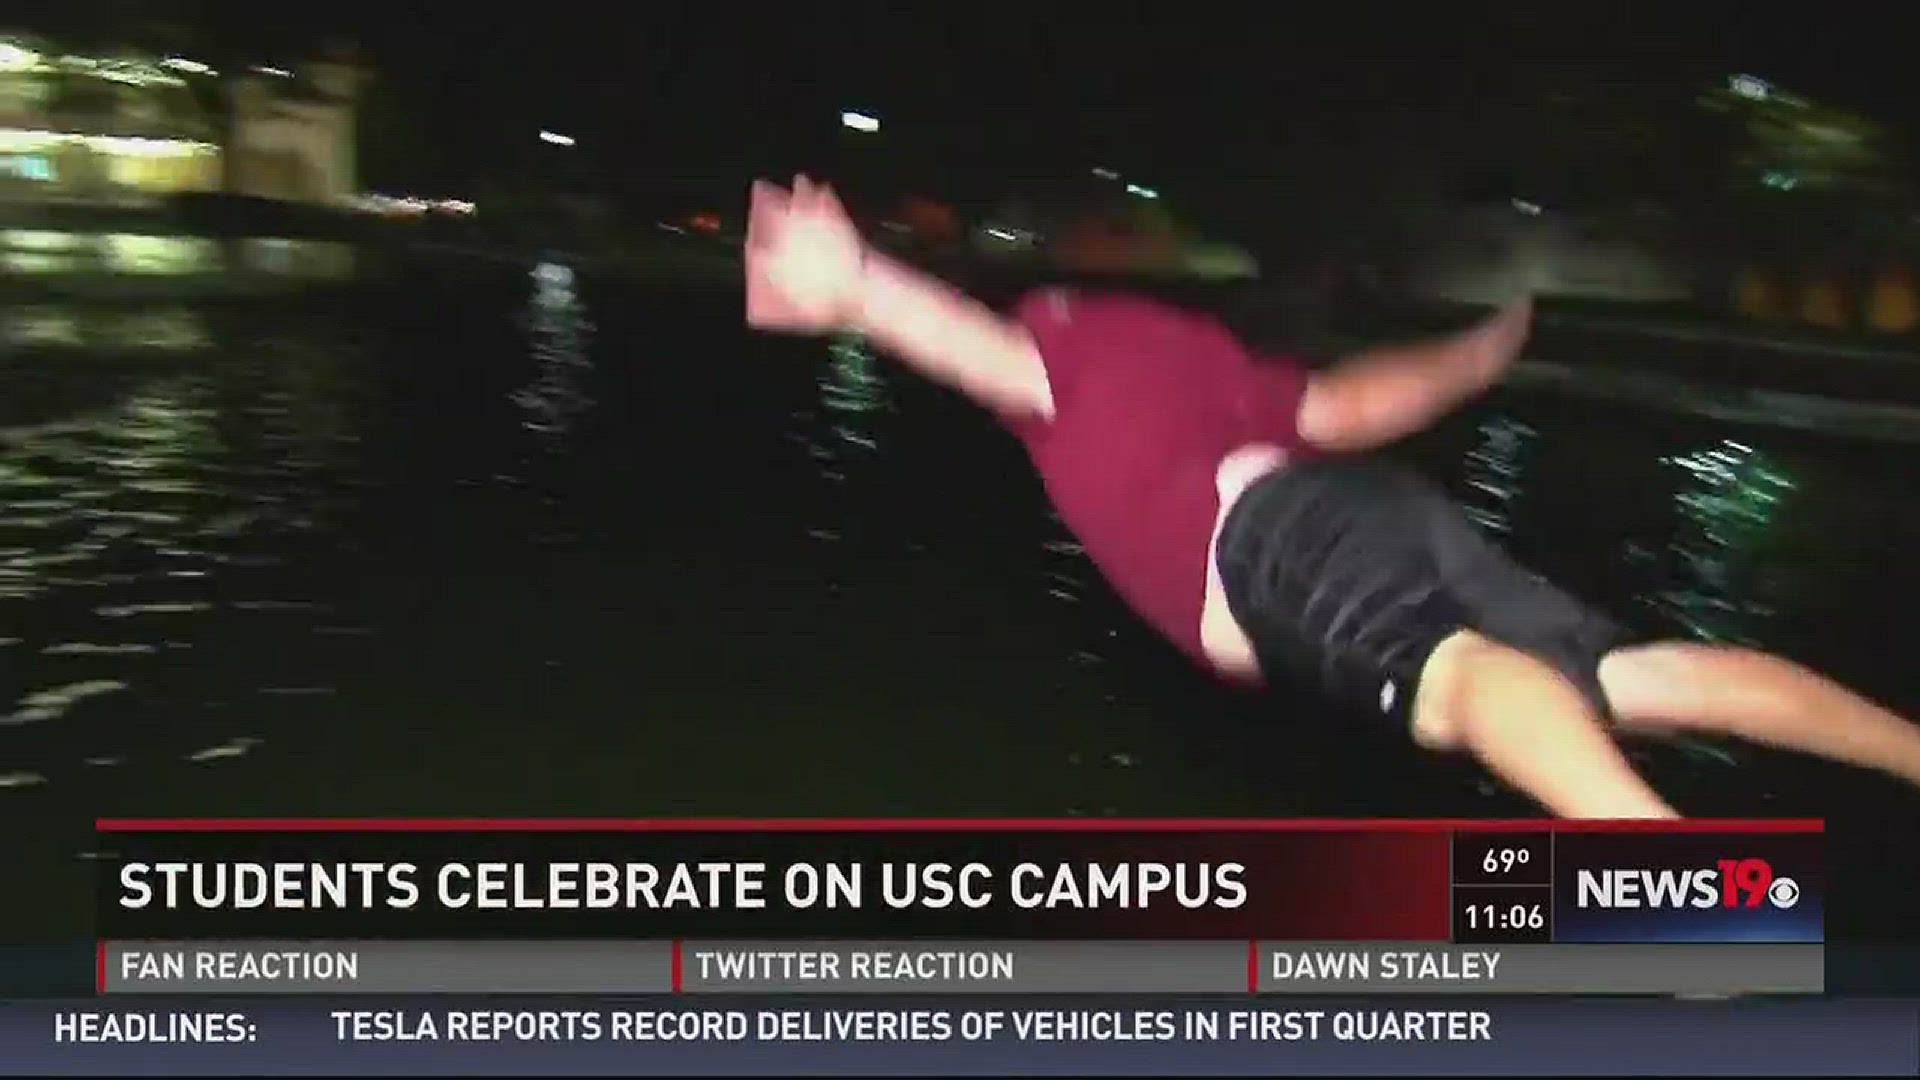 USC students knew where to go to celebrate the National Championship title.